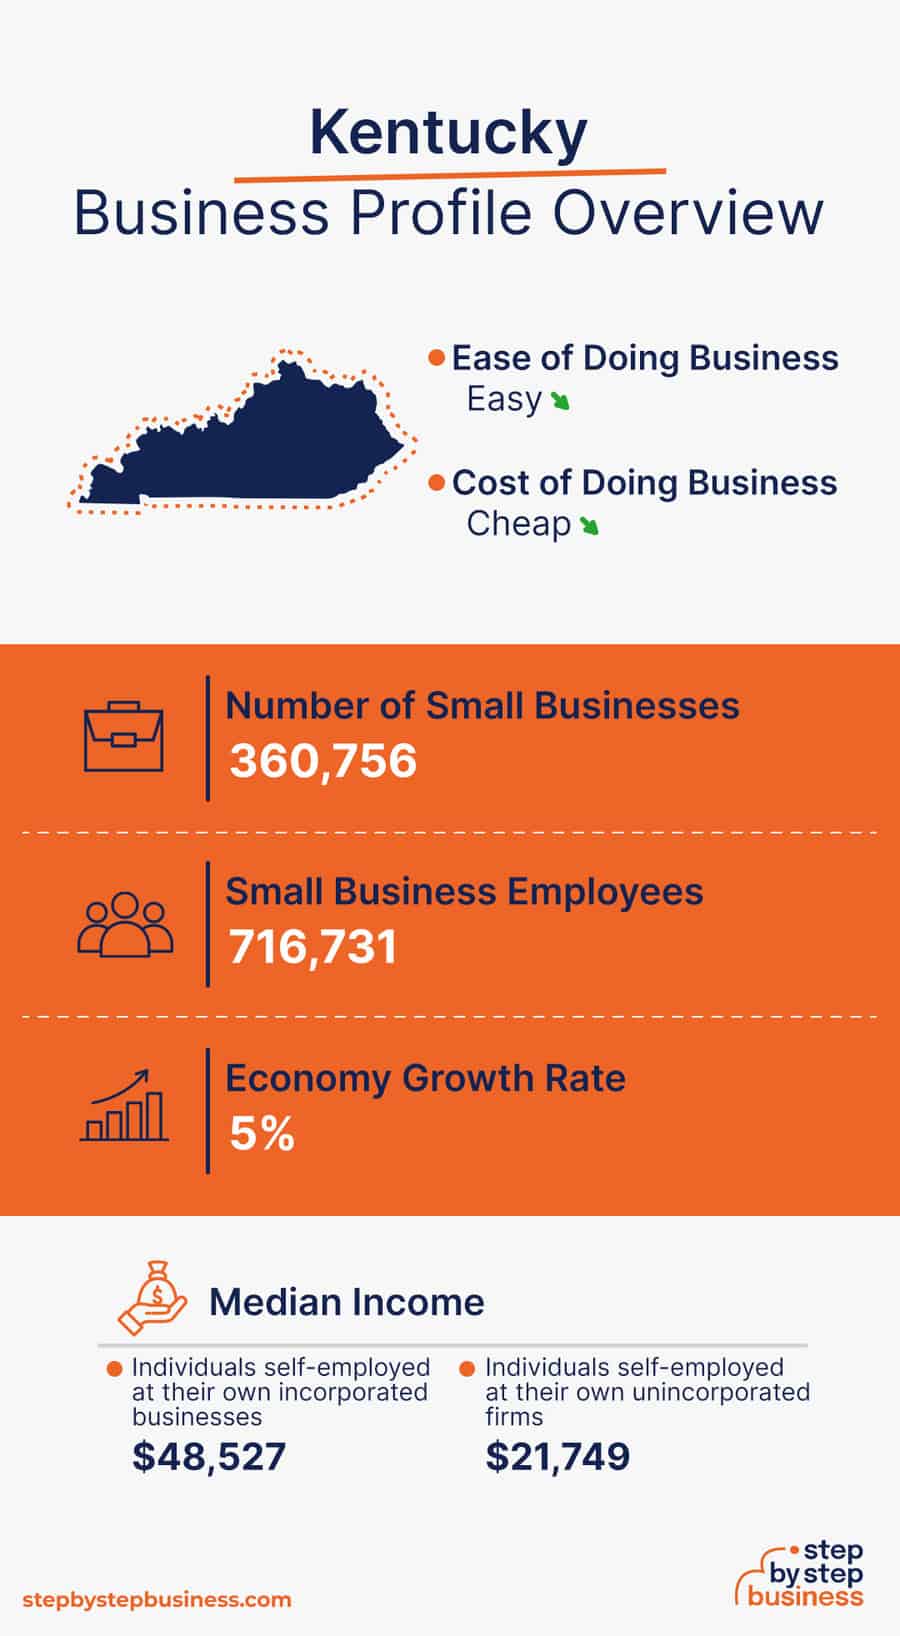 Kentucky Business Profile Overview